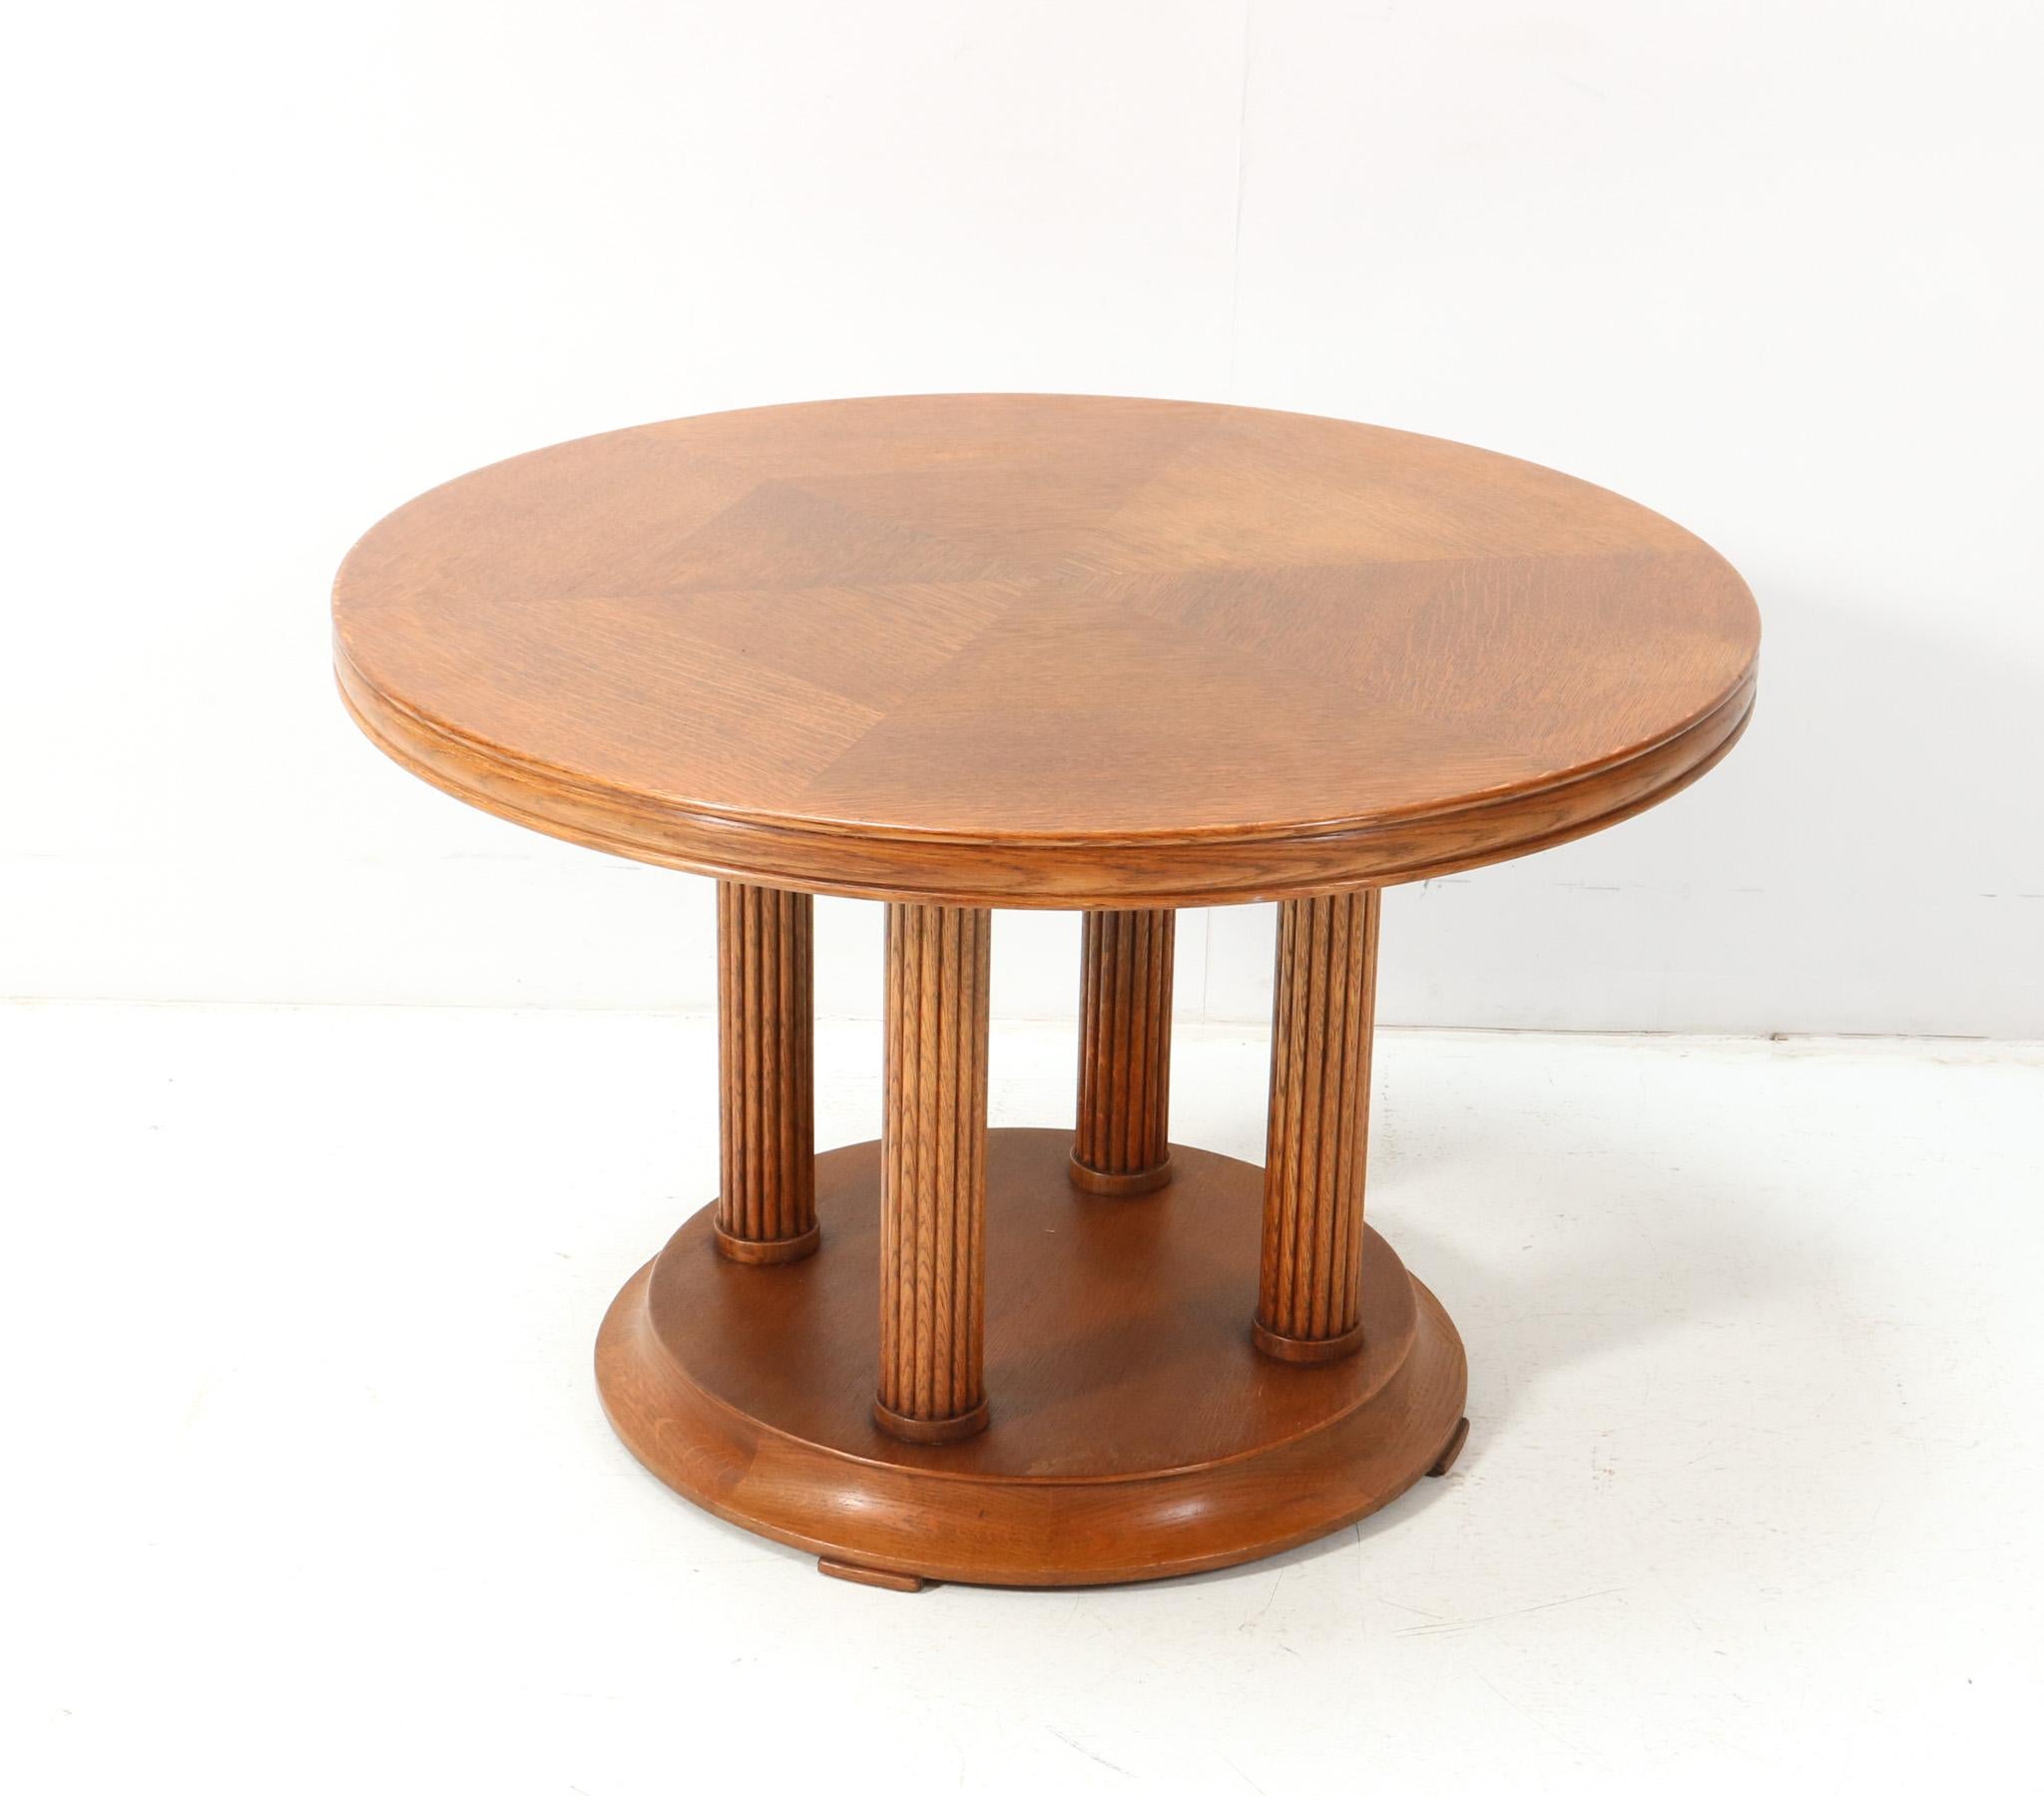 Stunning and rare Art Deco coffee table or cocktail table.
Design by Fer Semey for H. Pander & Zonen Den Haag.
Striking Dutch design from the 1930s.
Solid oak base with original oak veneered top.
This wonderful Art Deco coffee table or cocktail